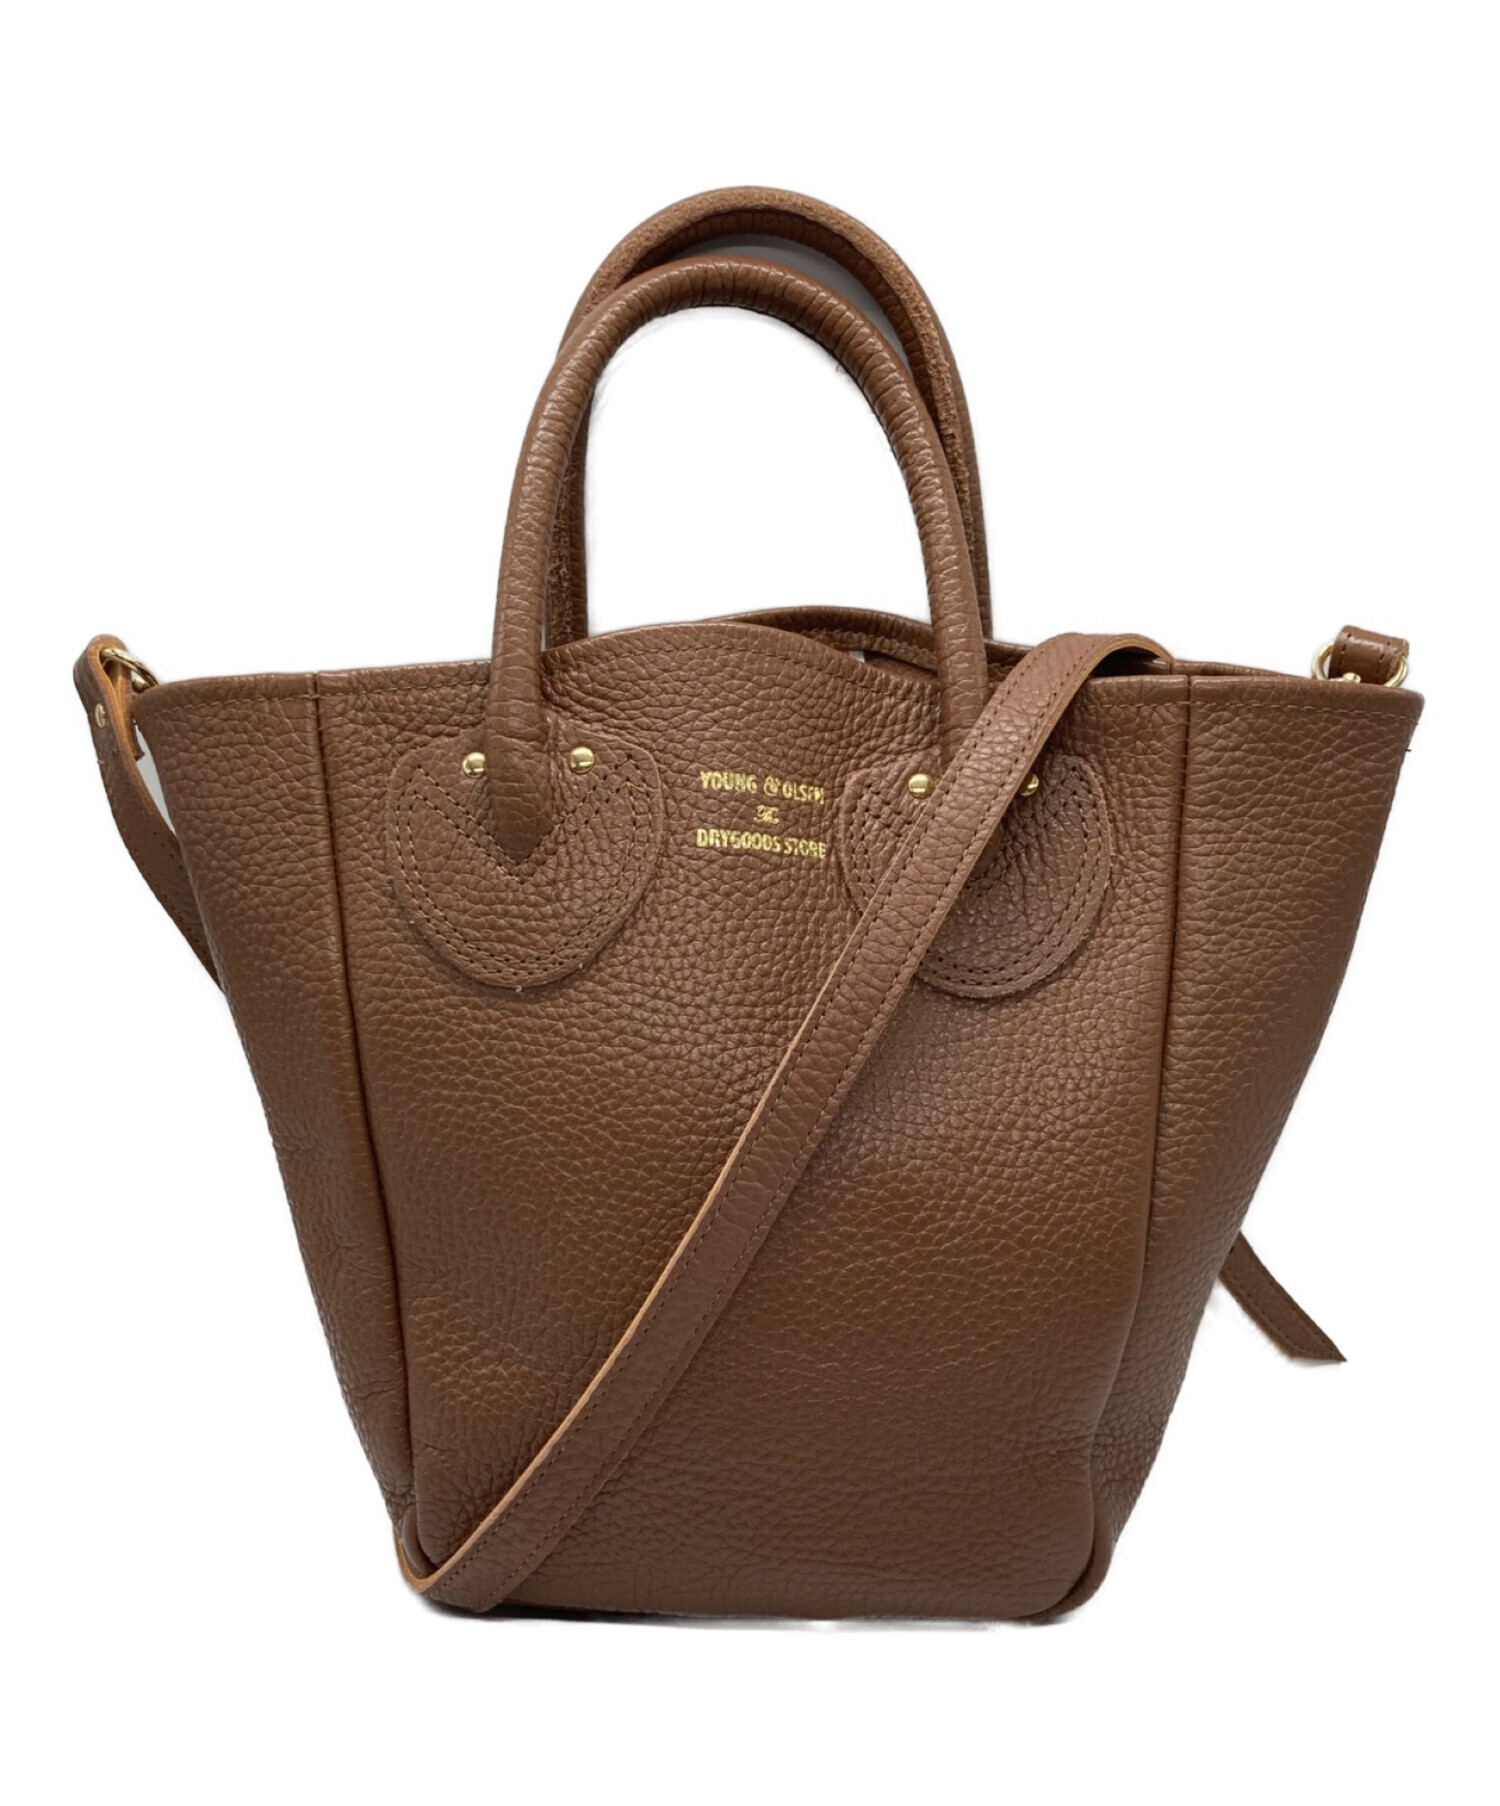 YOUNG & OLSEN The DRYGOODS STORE (ヤングアンドオルセン ザ ドライグッズストア) PETITE LEATHER  TOTE 2way バッグ ブラウン